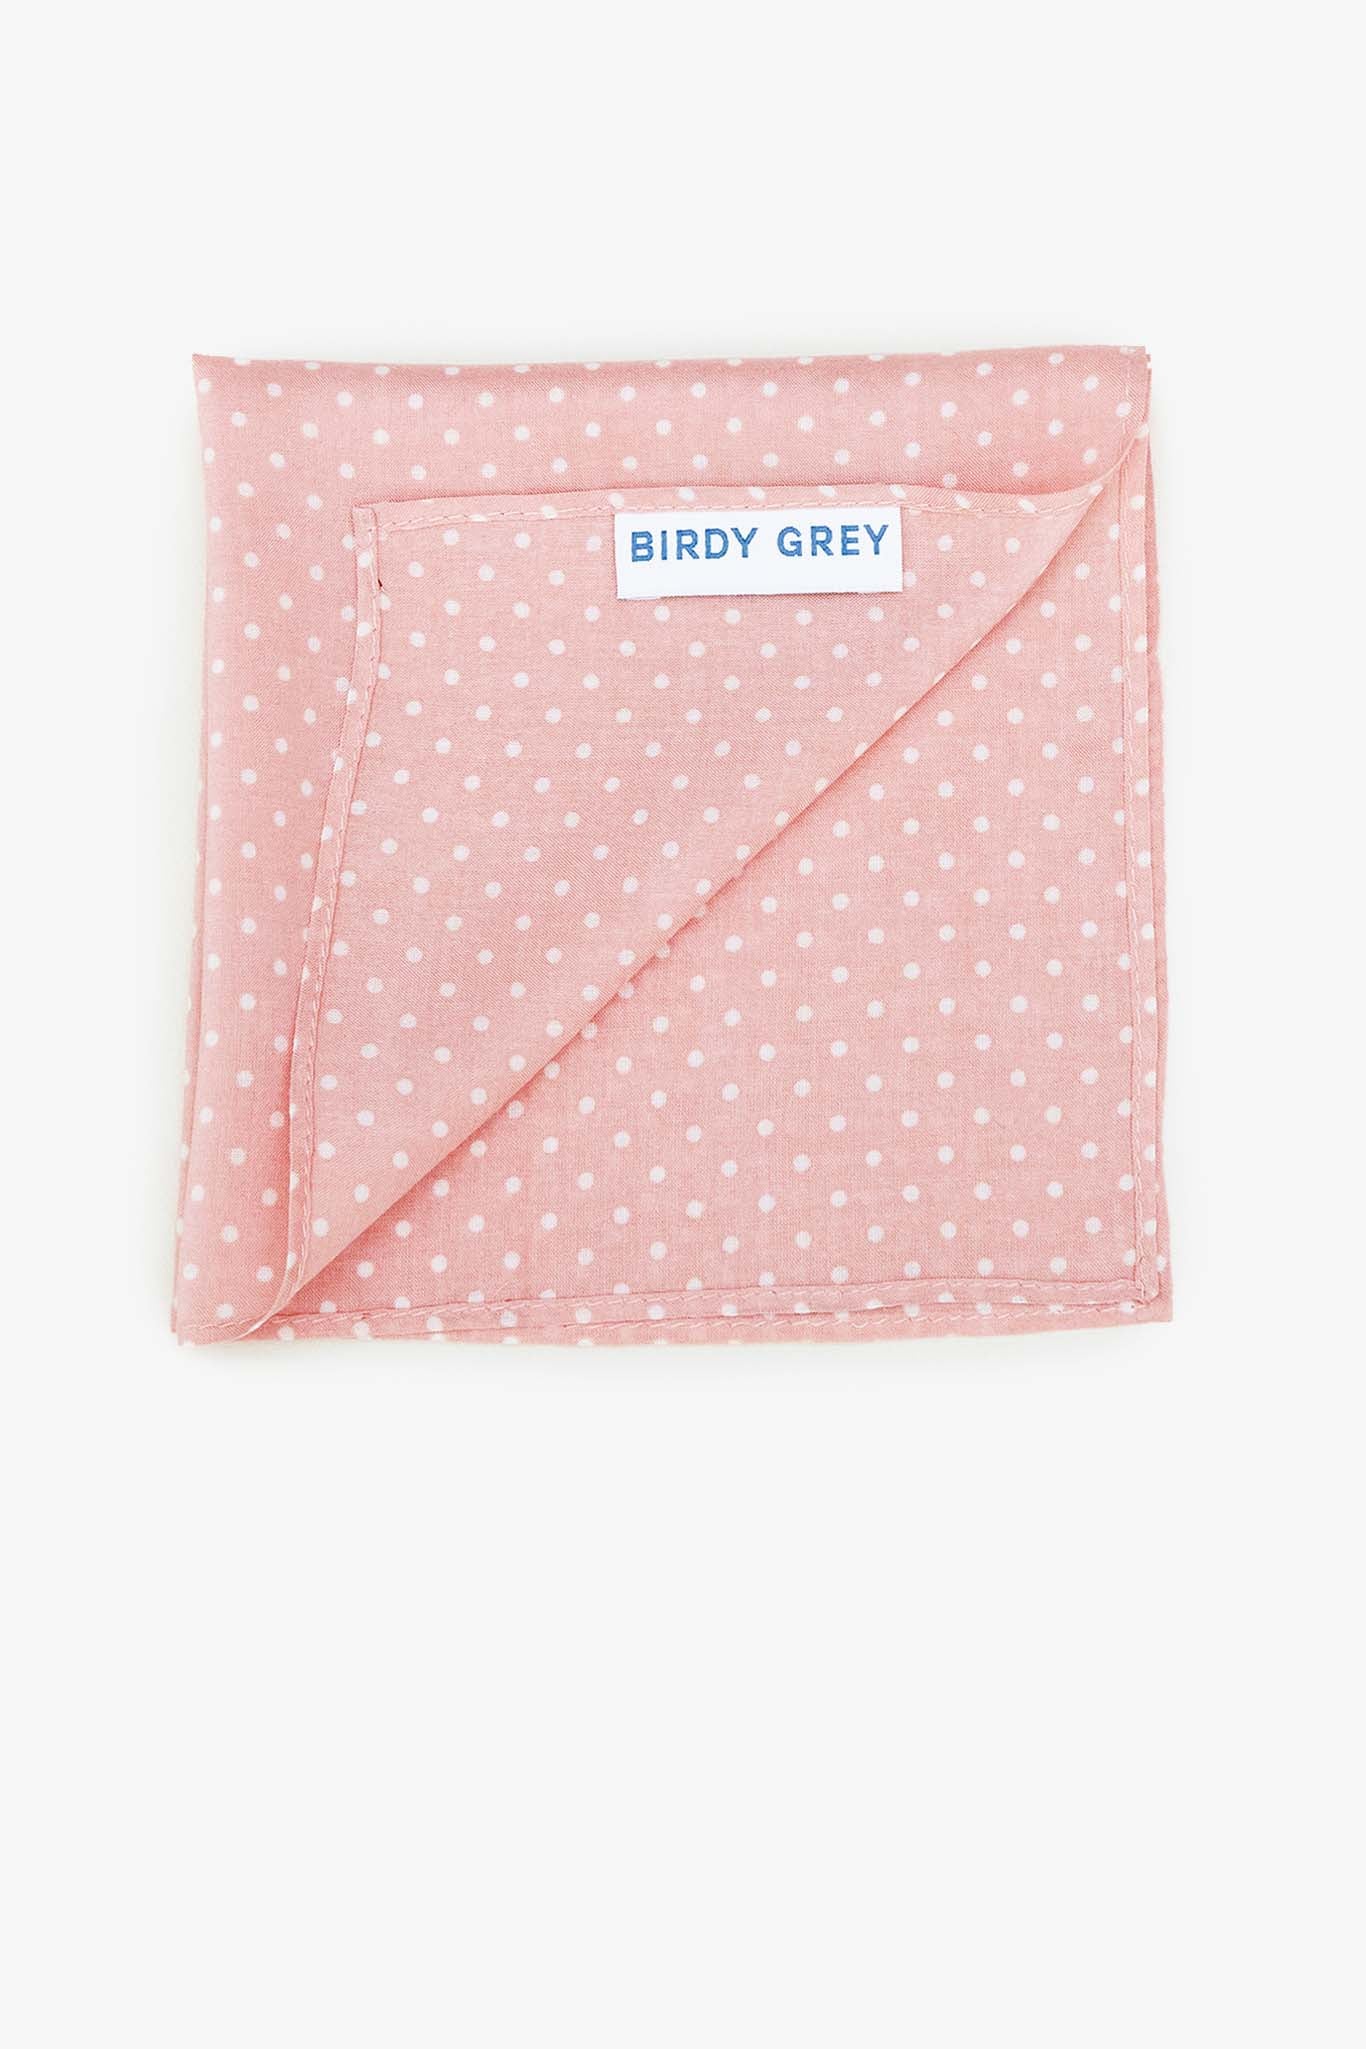 Didi Pocket Square in dusty rose dot by Birdy Grey, back view